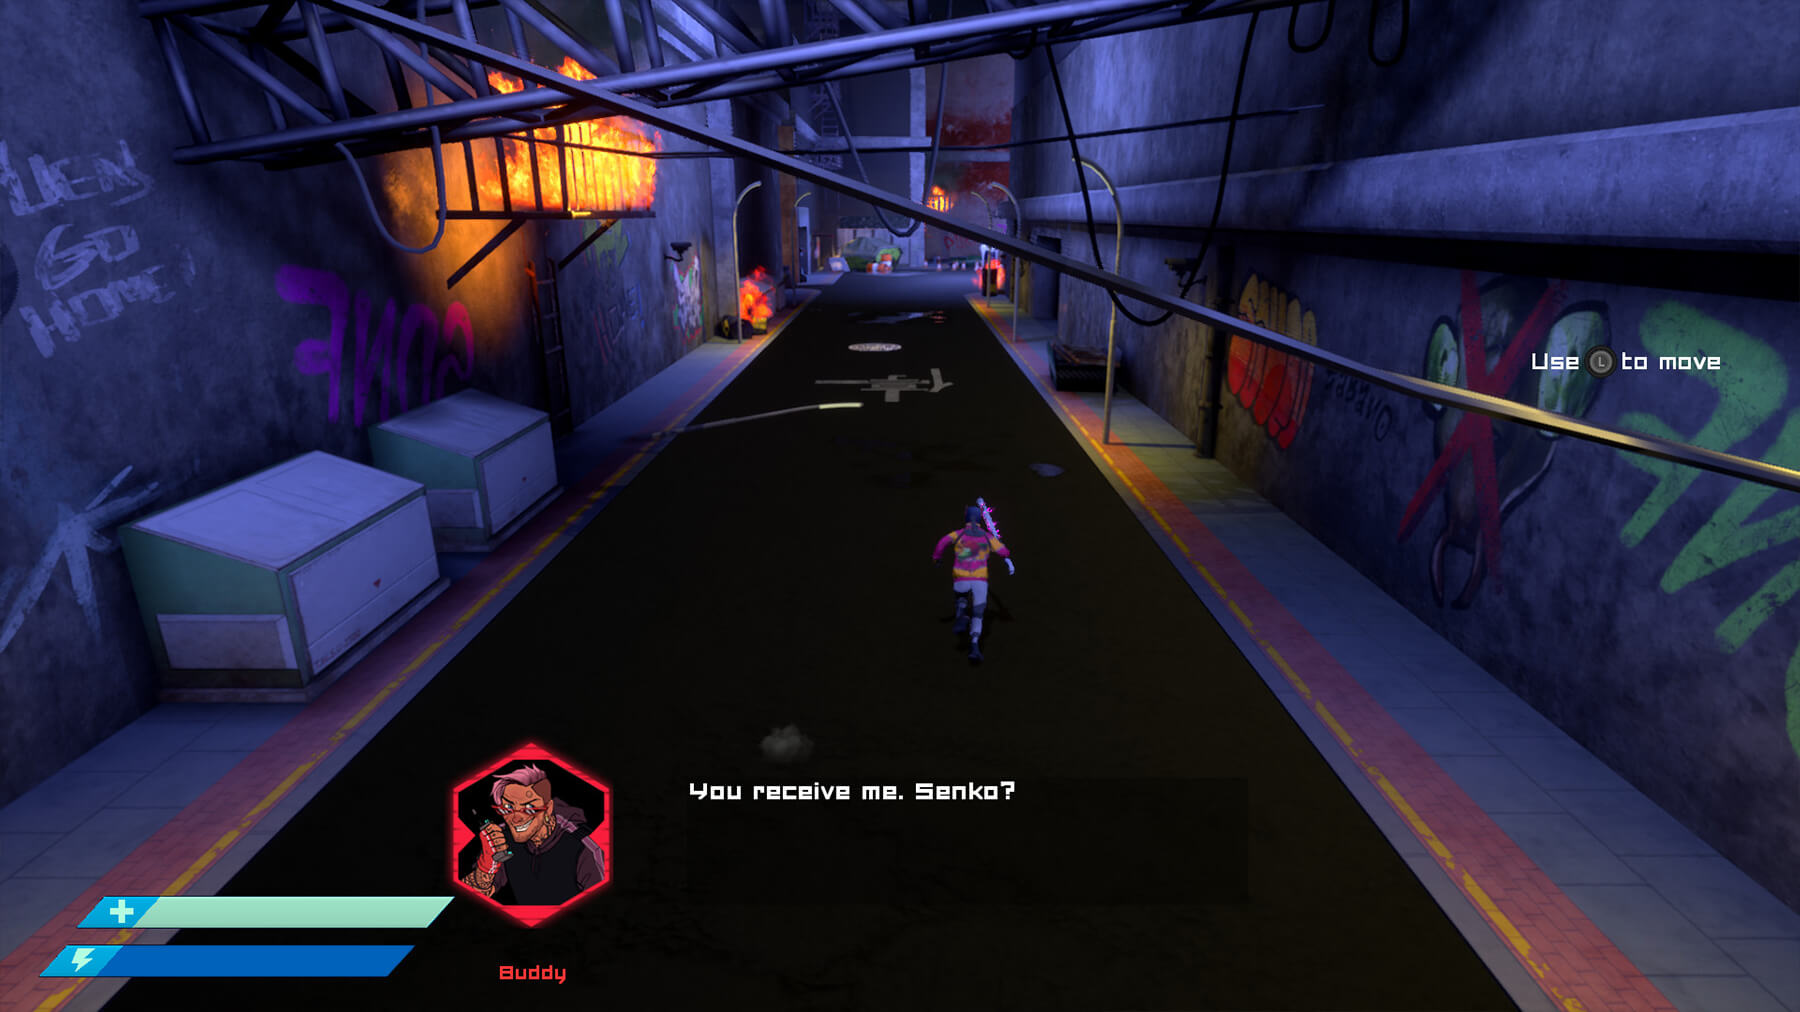 A gritty screenshot from DigiPen student game Project Senko showing dialogue with the character 'Buddy'.